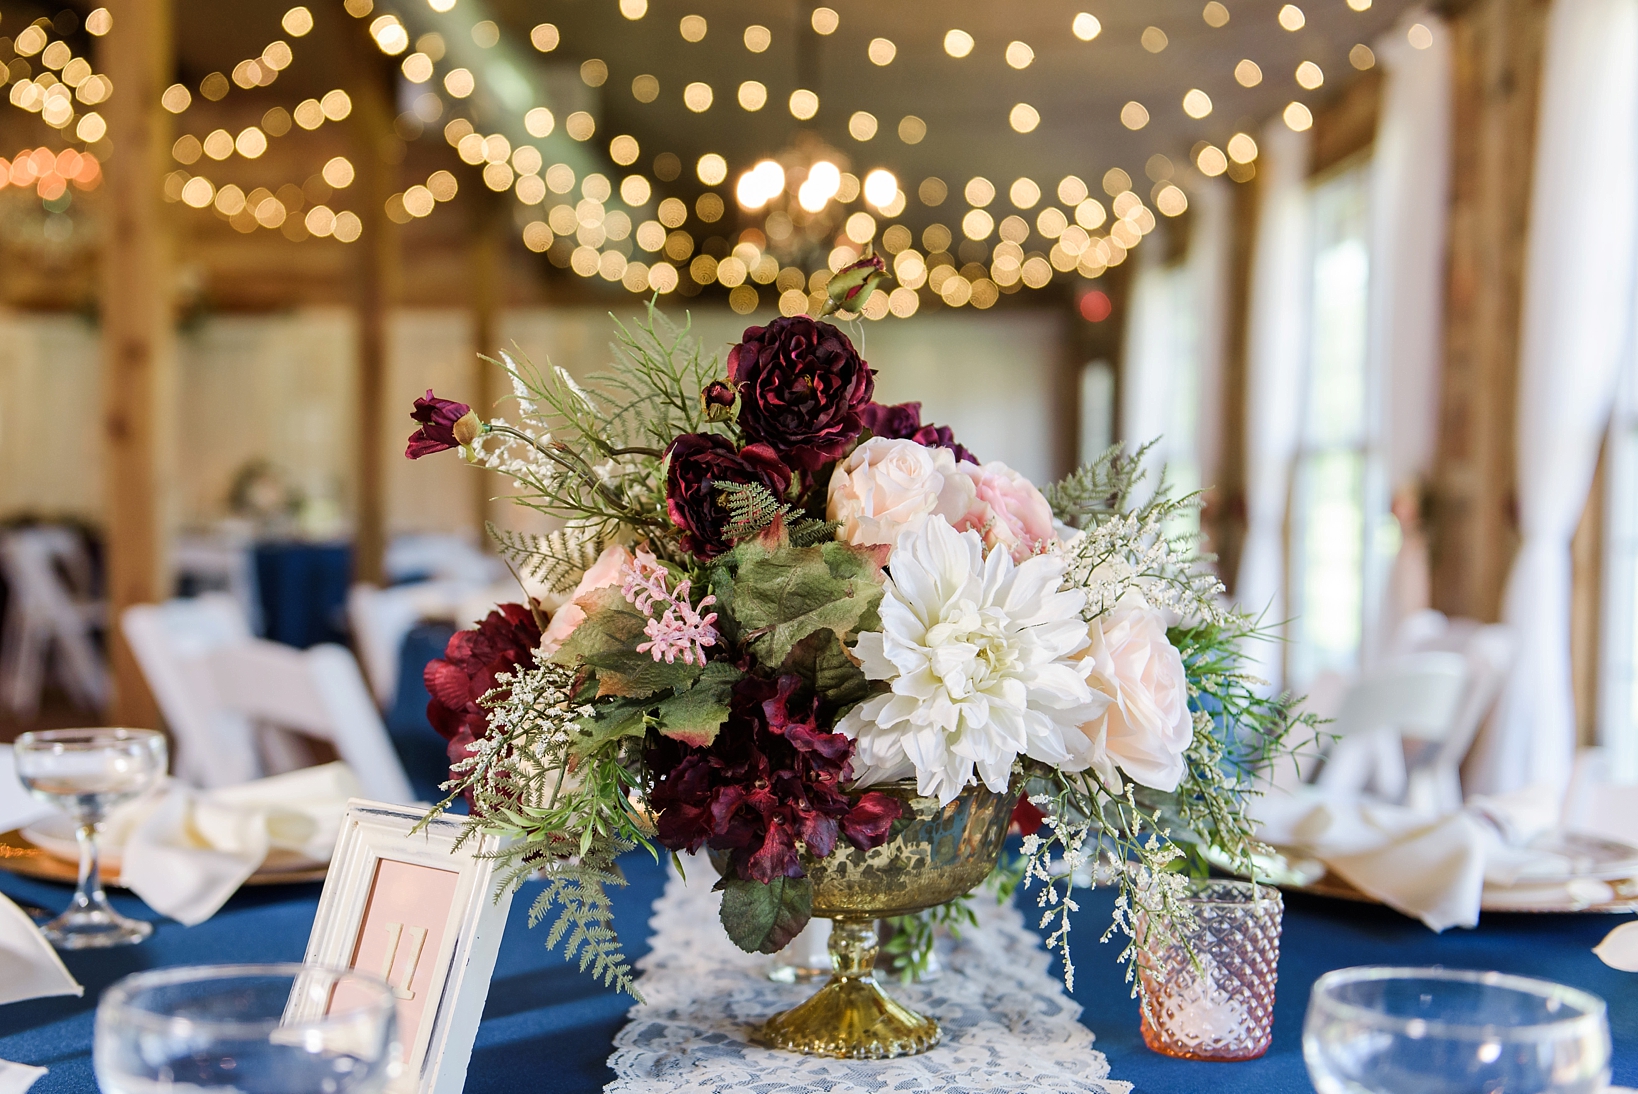 Short floral centerpiece with string lights